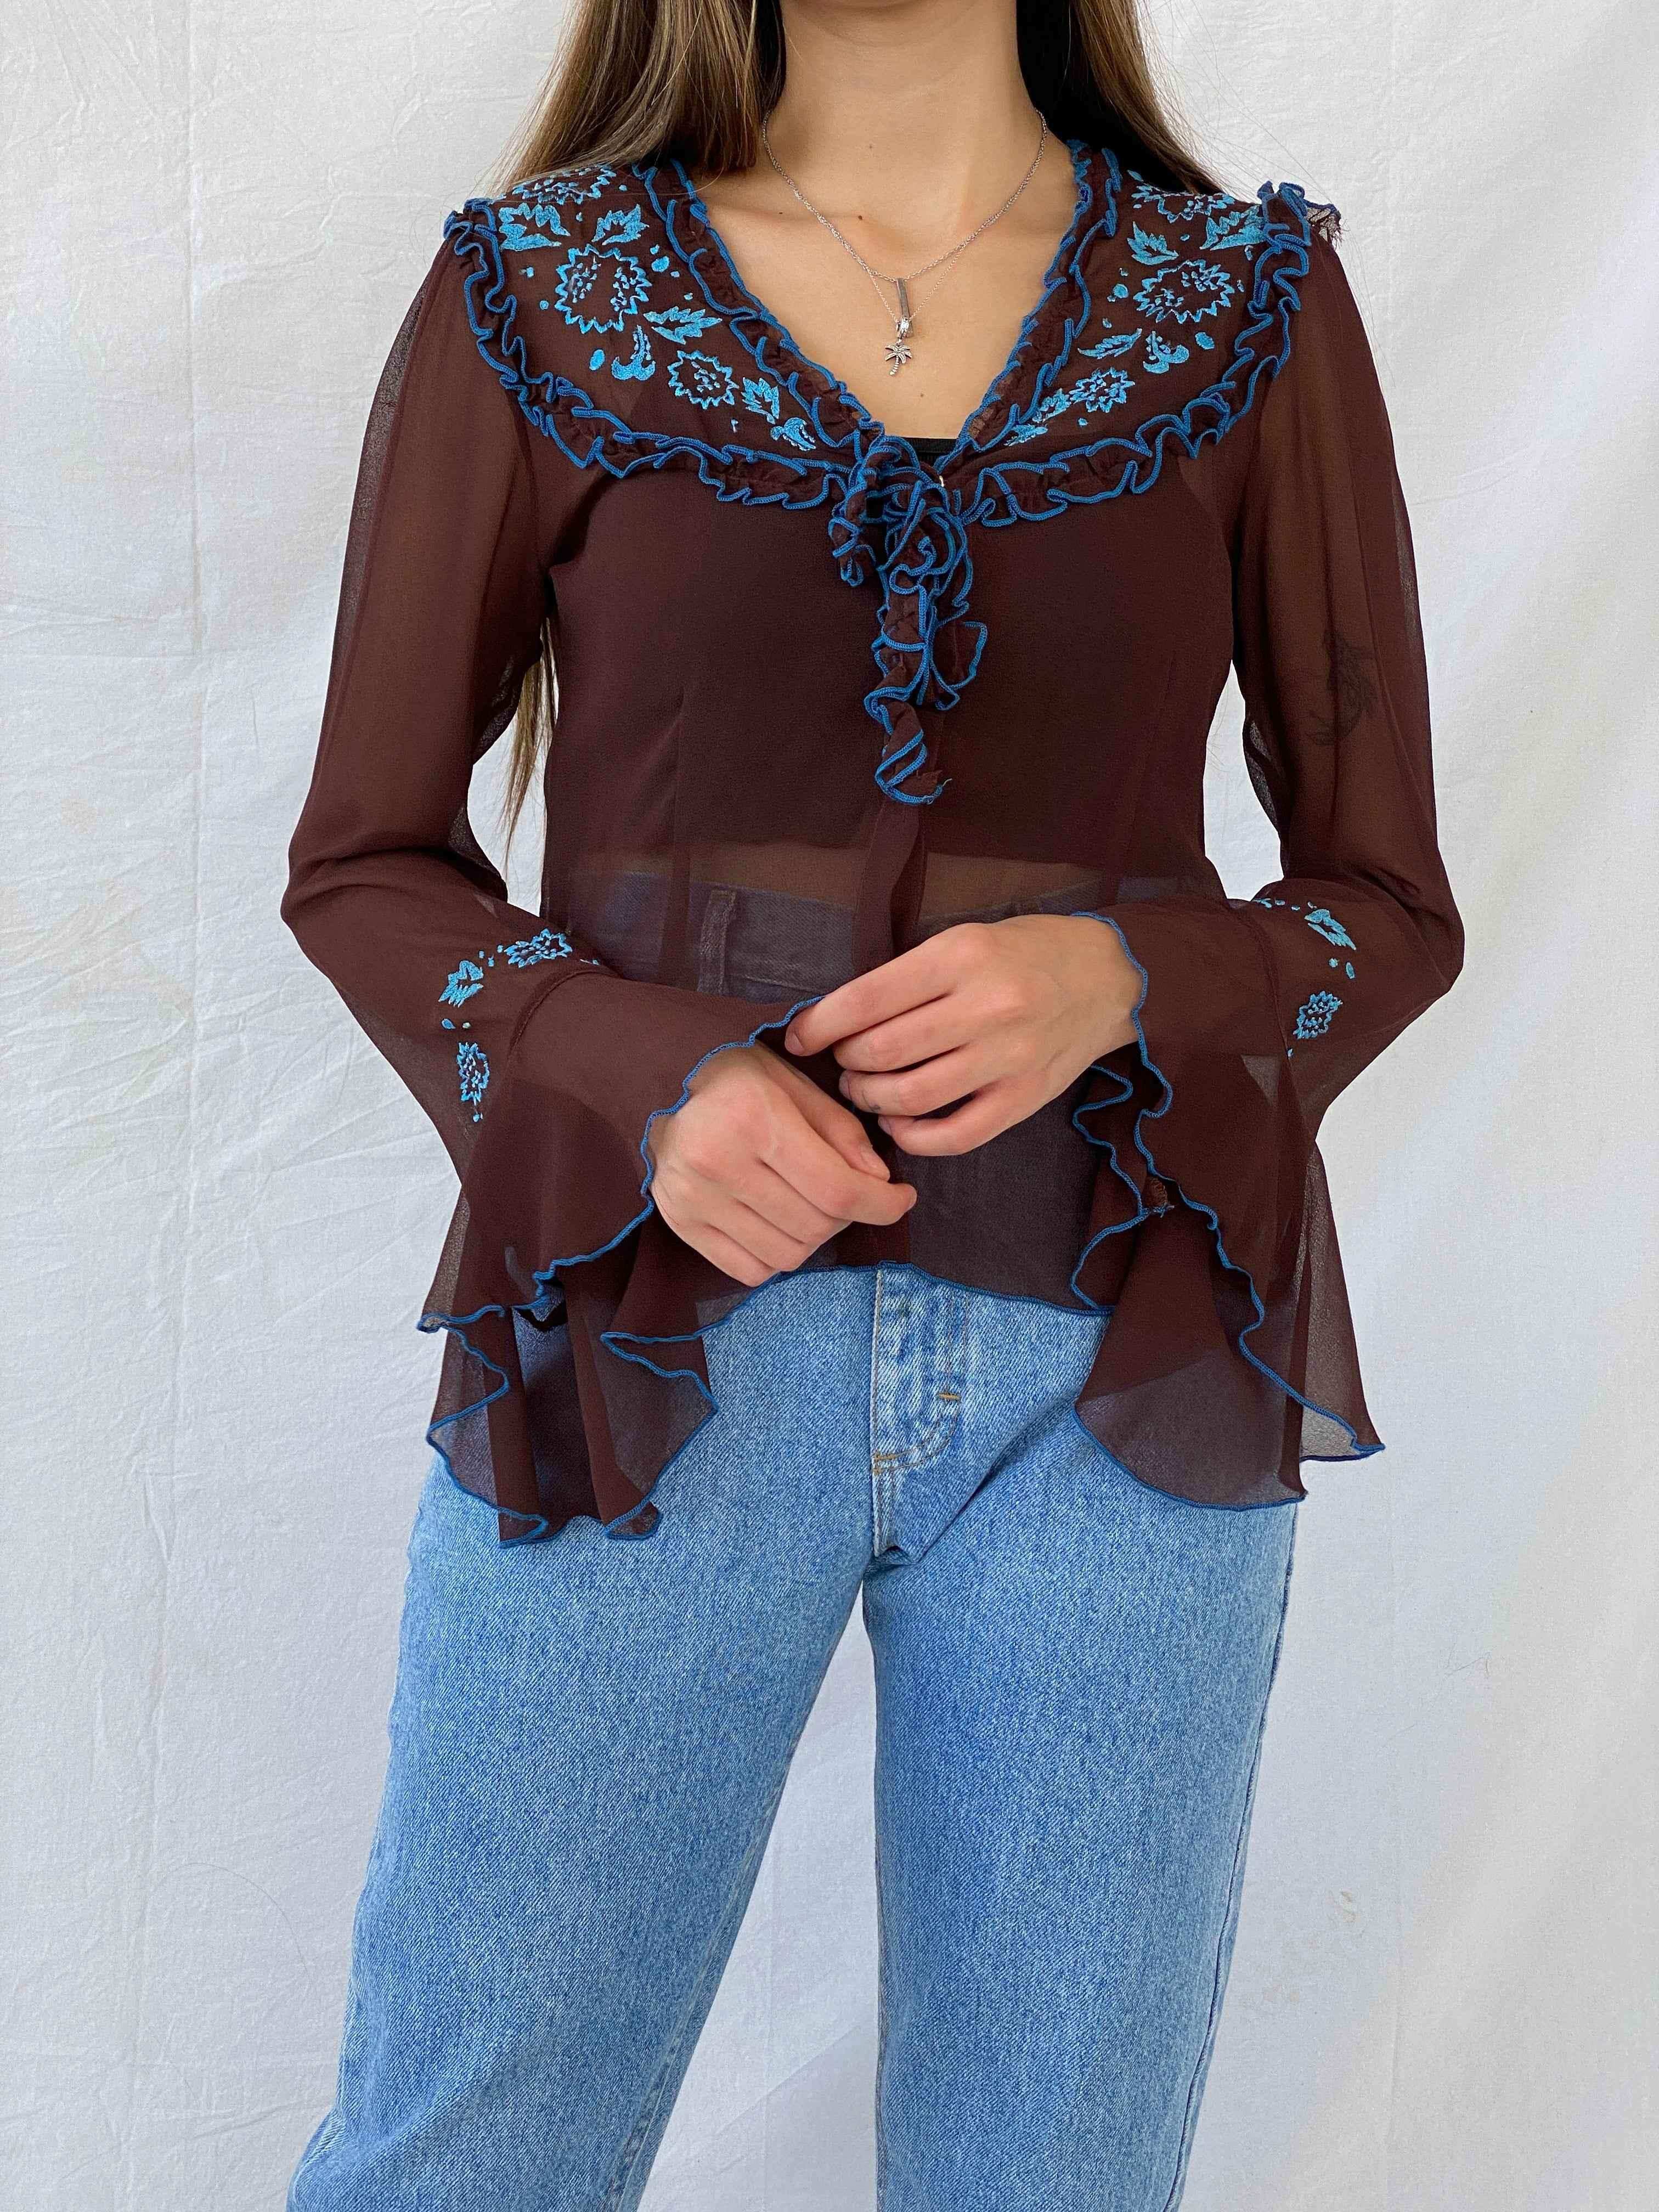 Vintage NDEH Floral Embroidered Sheer Top - Balagan Vintage Mesh Top floral mesh, full sleeve top, mesh top, Mira, NEW IN